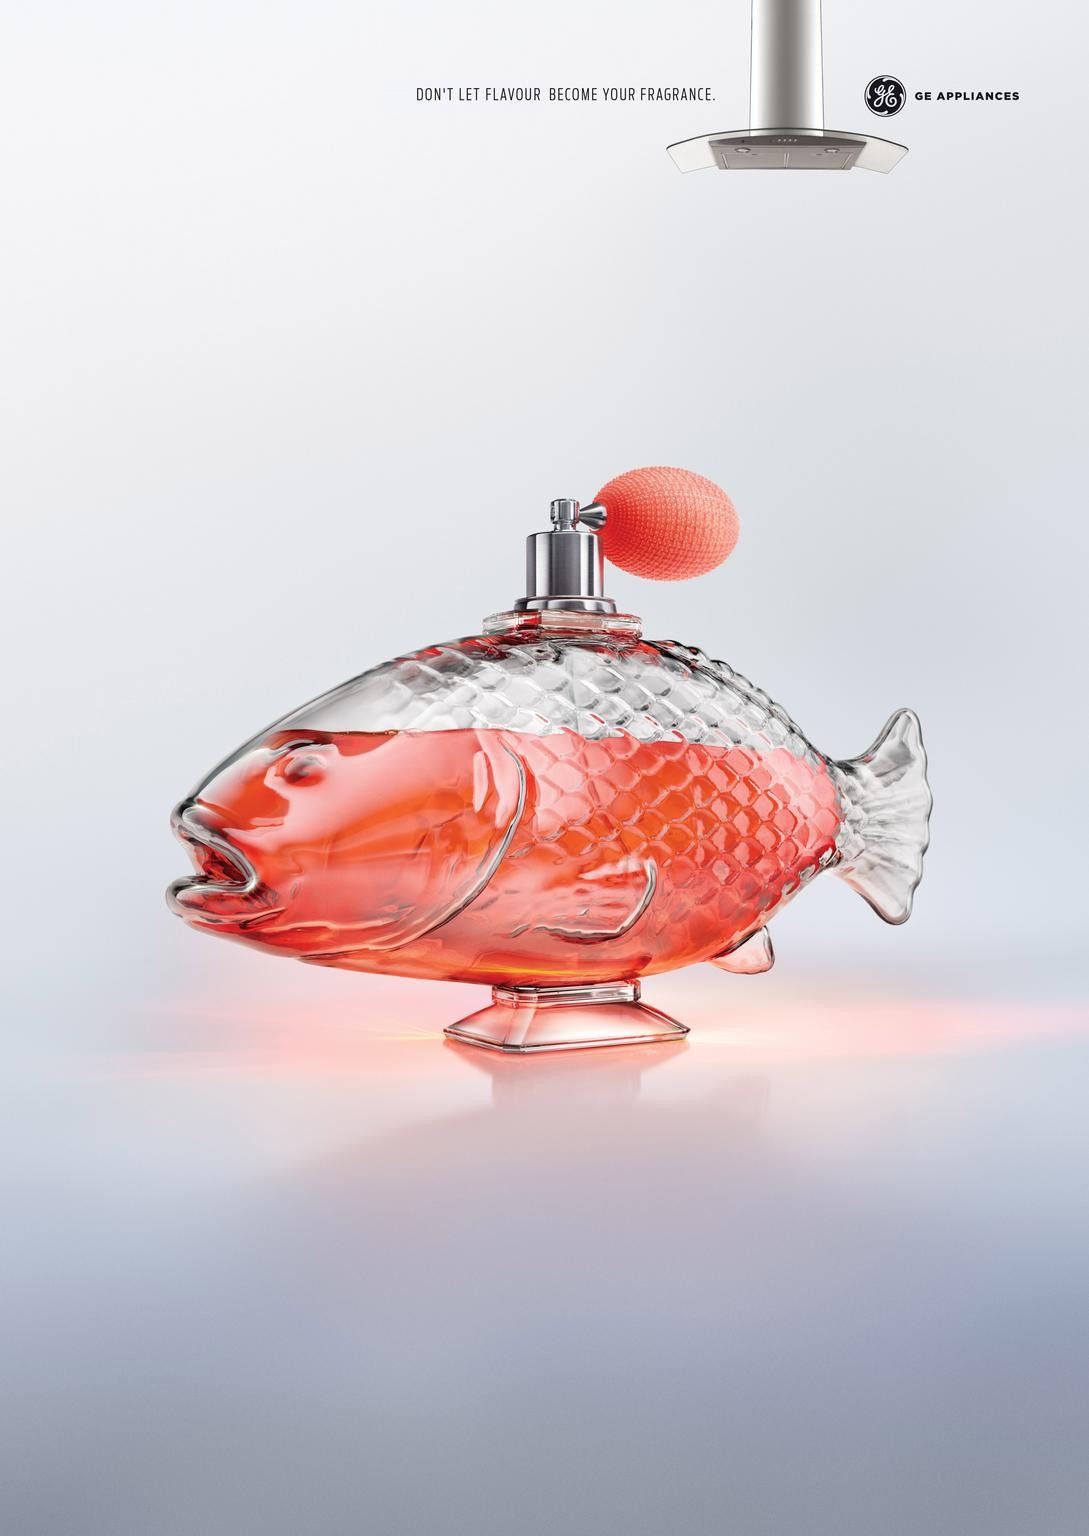 Flavours to Fragrances - Fish